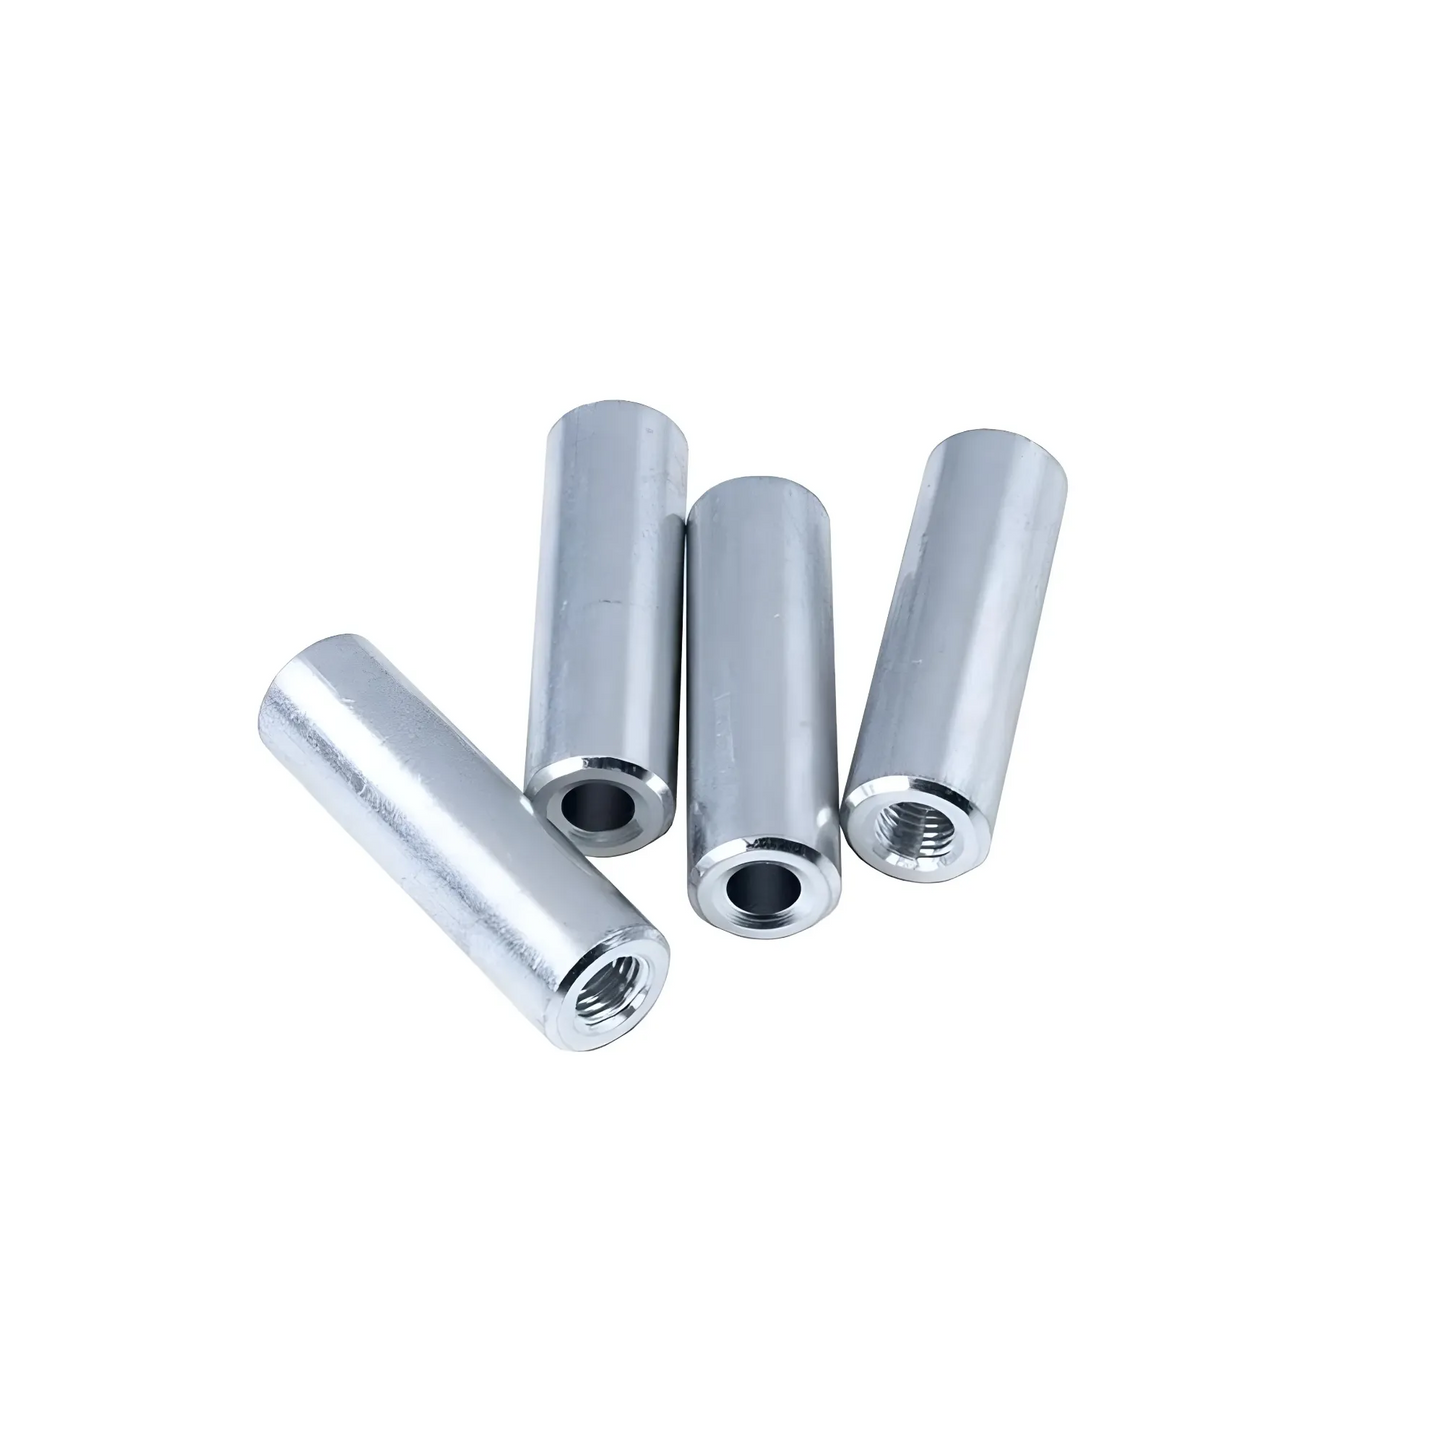 1/16" Annular Nozzle Bung - 4 Pack